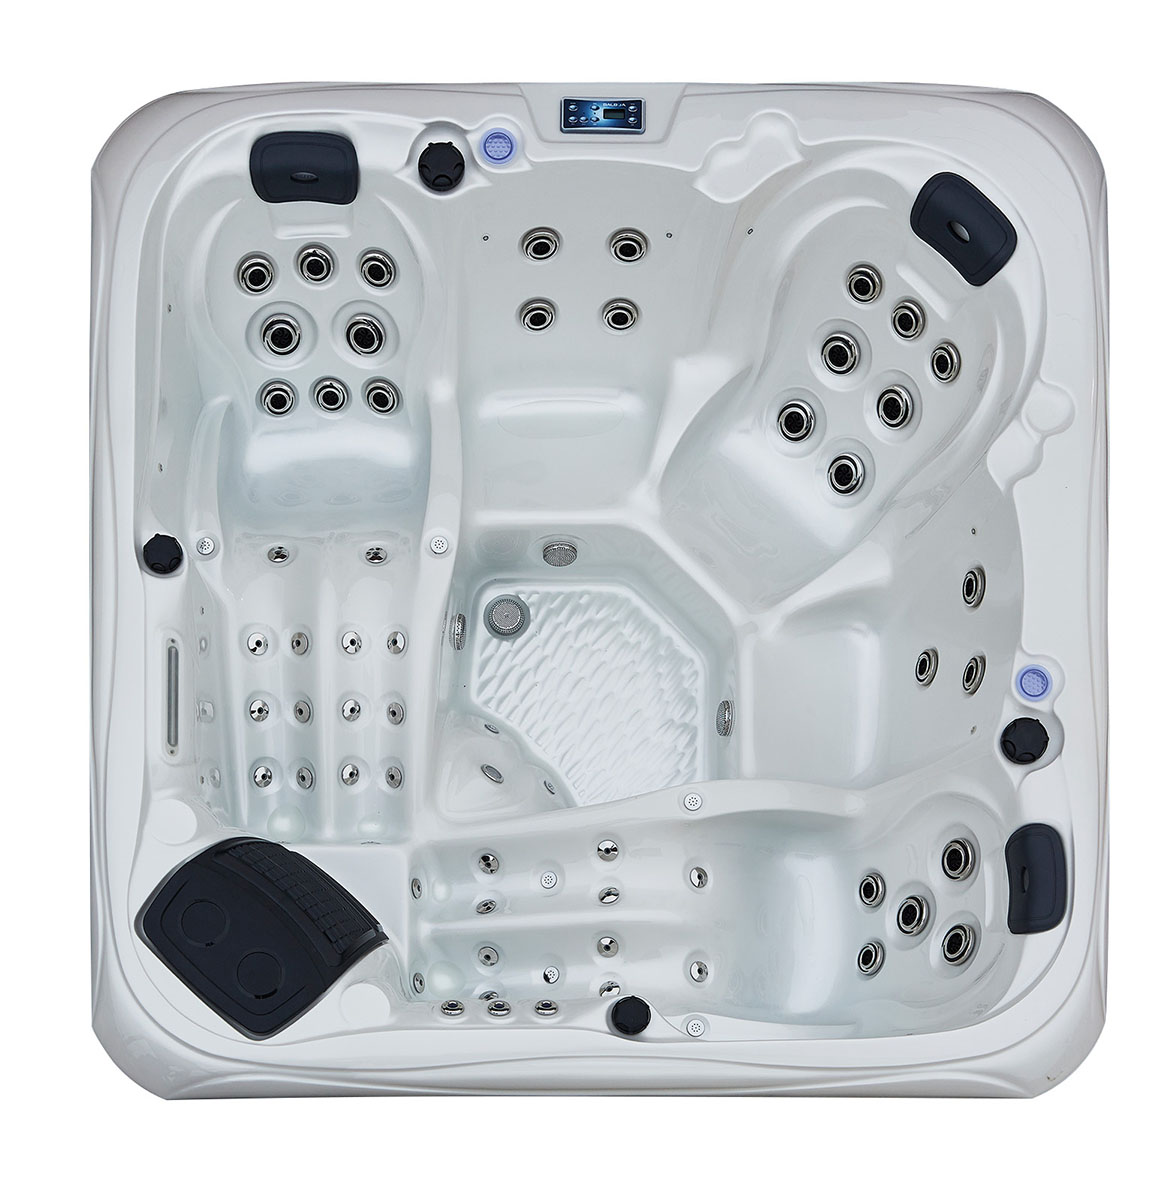 BG-8895A Best Selling Hydro Massage Function with Balboa System Whirlpool Hot Spa Tub 